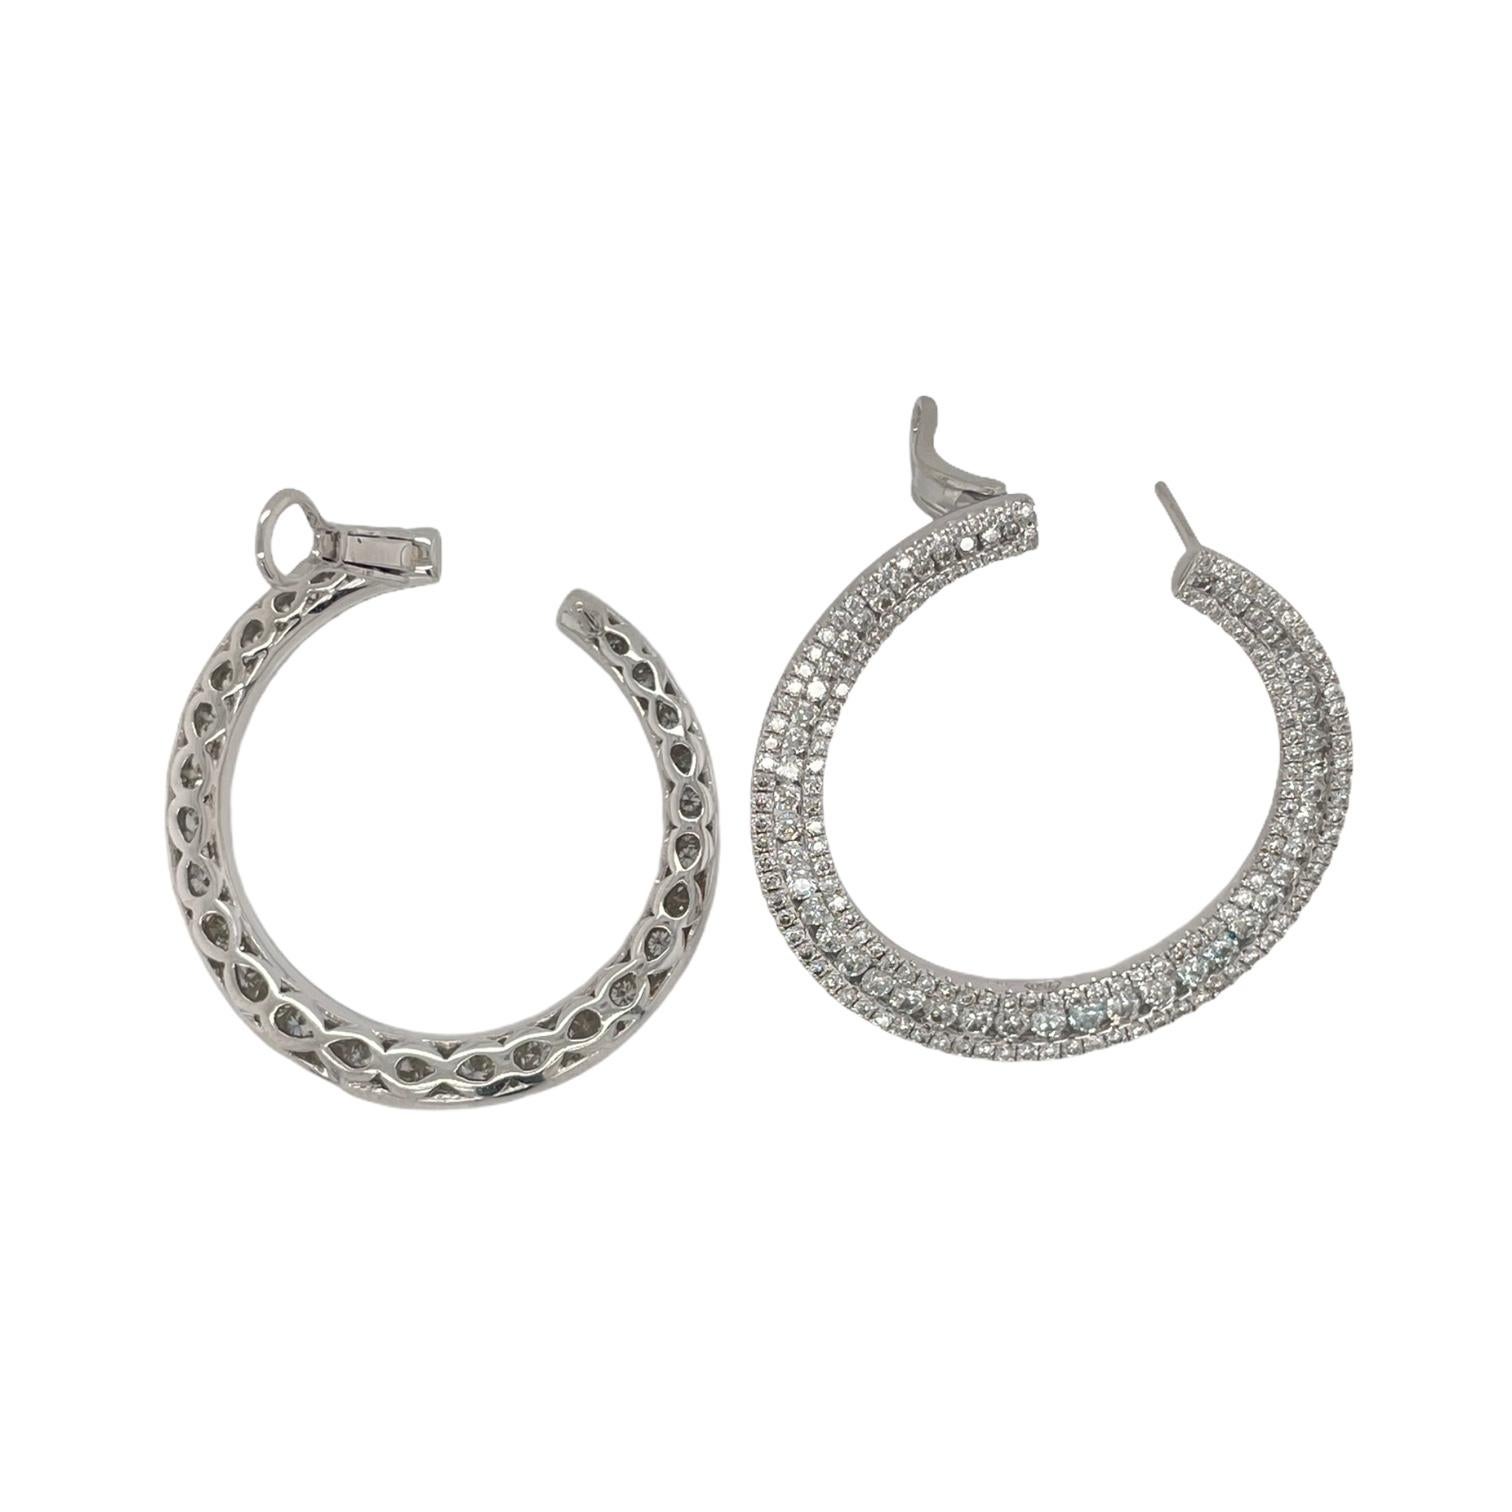 Spectacular front facing diamond hoops in 18k white gold. Earrings contain round brilliant diamonds, 3.62tcw. Diamonds are colorless and VS2 in clarity. All stones are mounted in a handmade pave style setting. Hoops measures 33mm wide and contains a